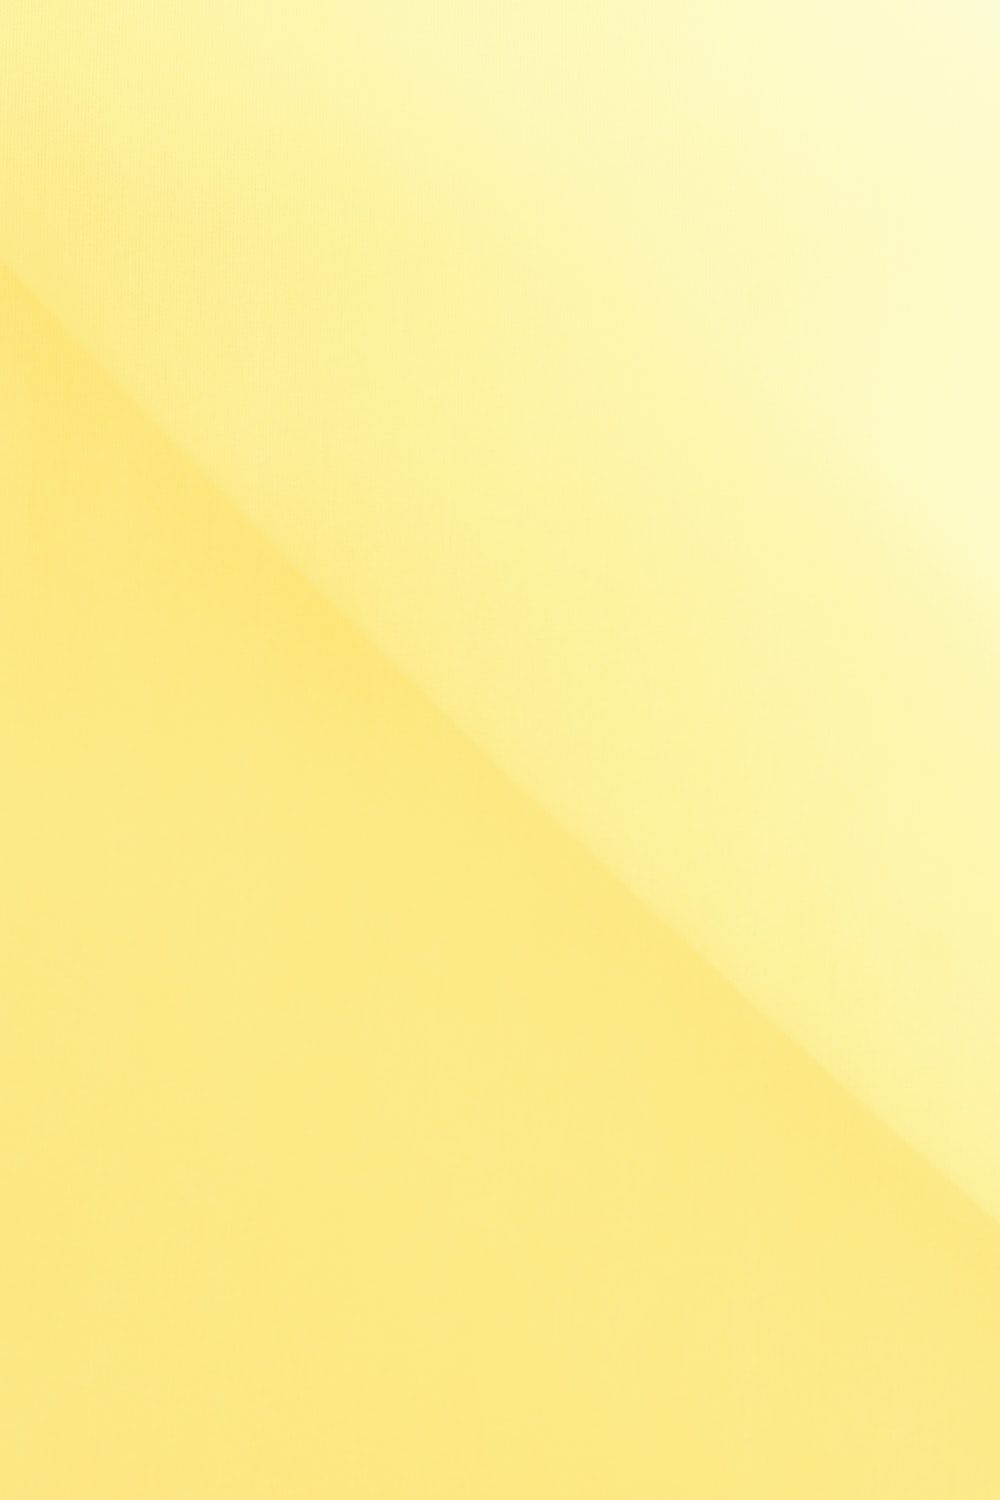 A yellow background with an apple on it - Light yellow